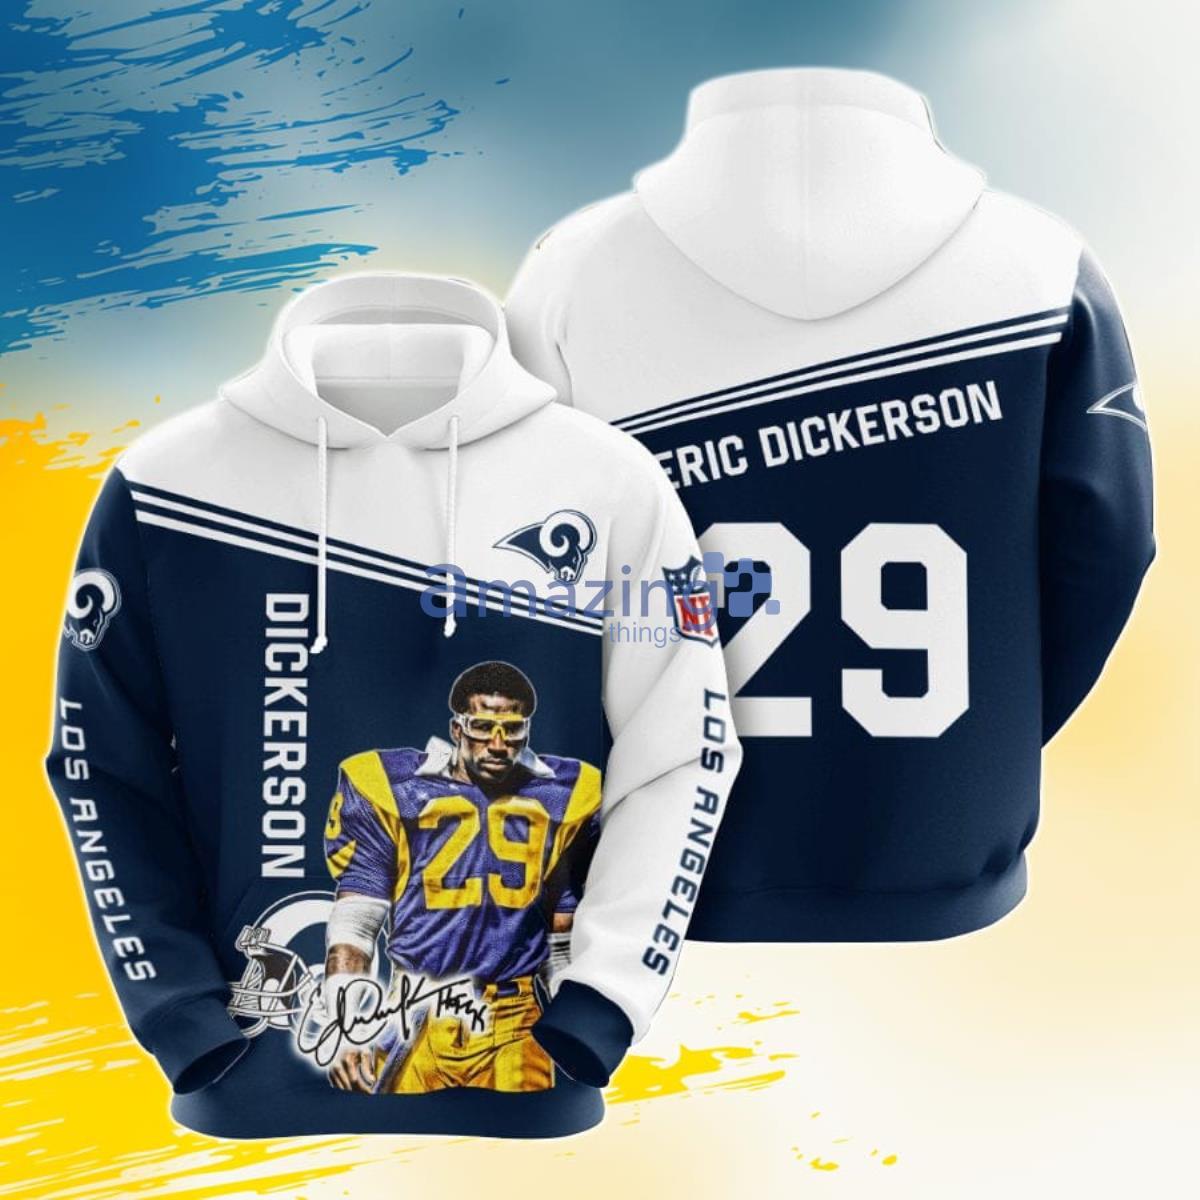 Los Angeles Rams, Eric Dickerson Jersey for Sale in Los Angeles